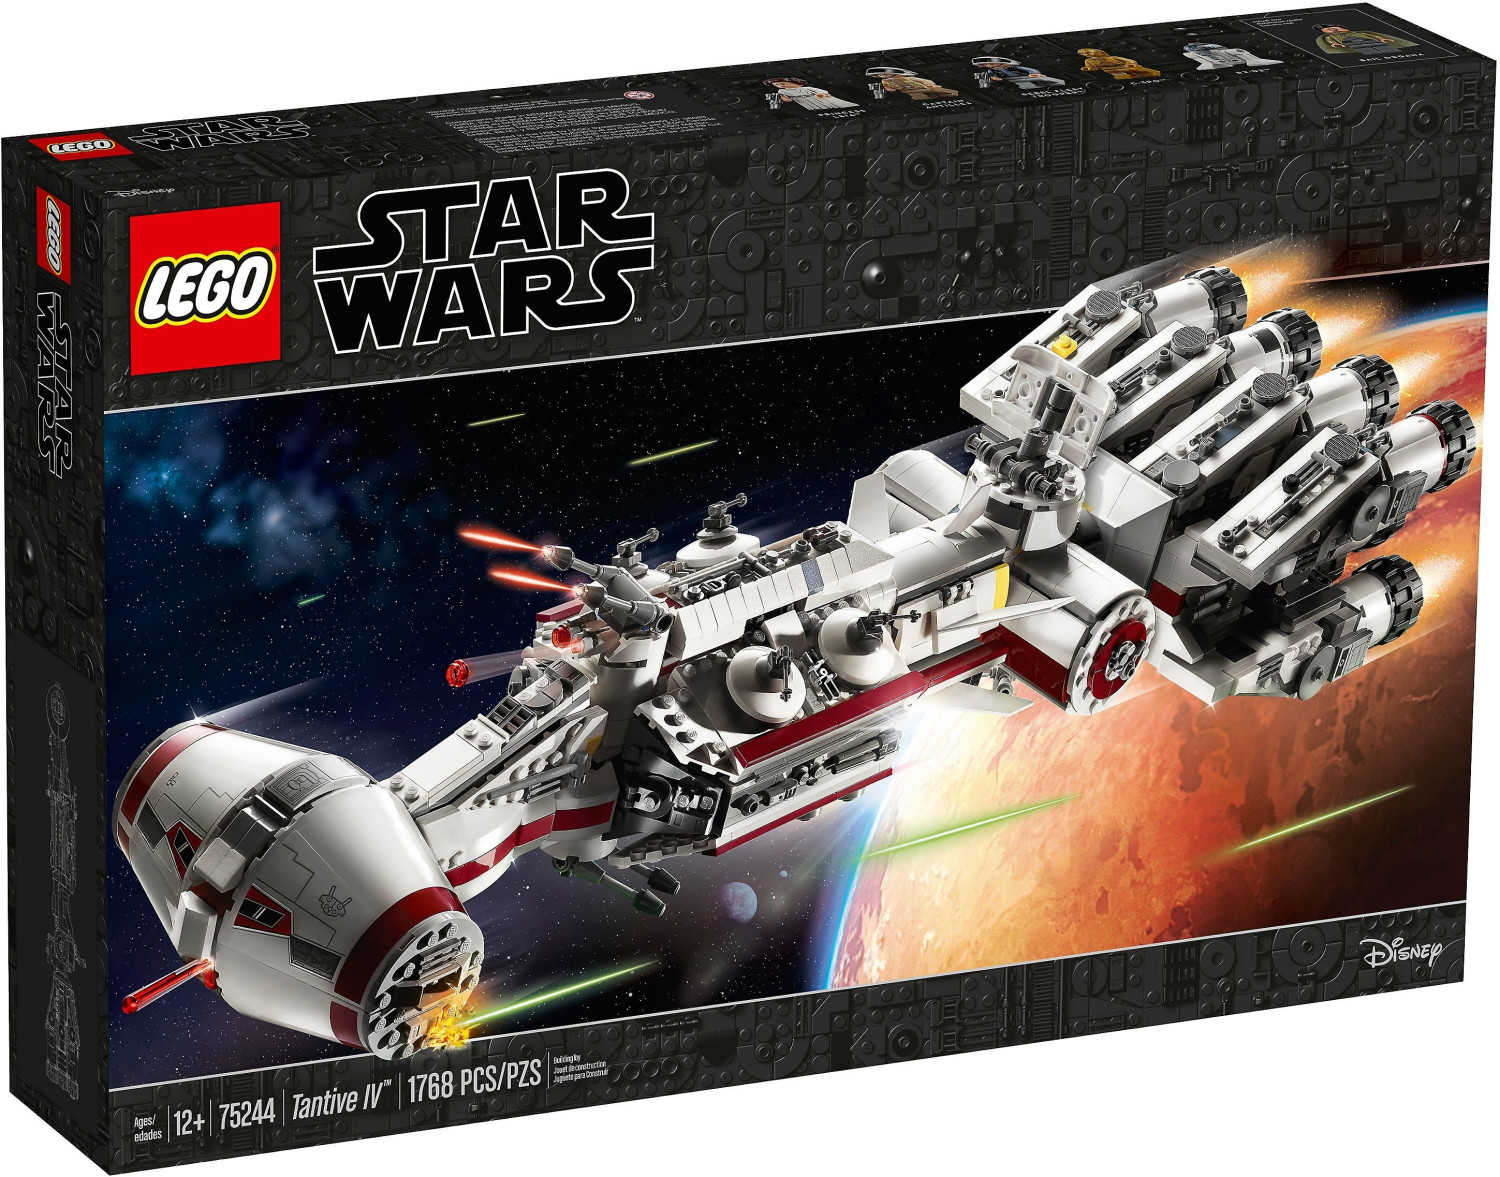 Lego Exclusive Star Wars 75244 - Tantive IV